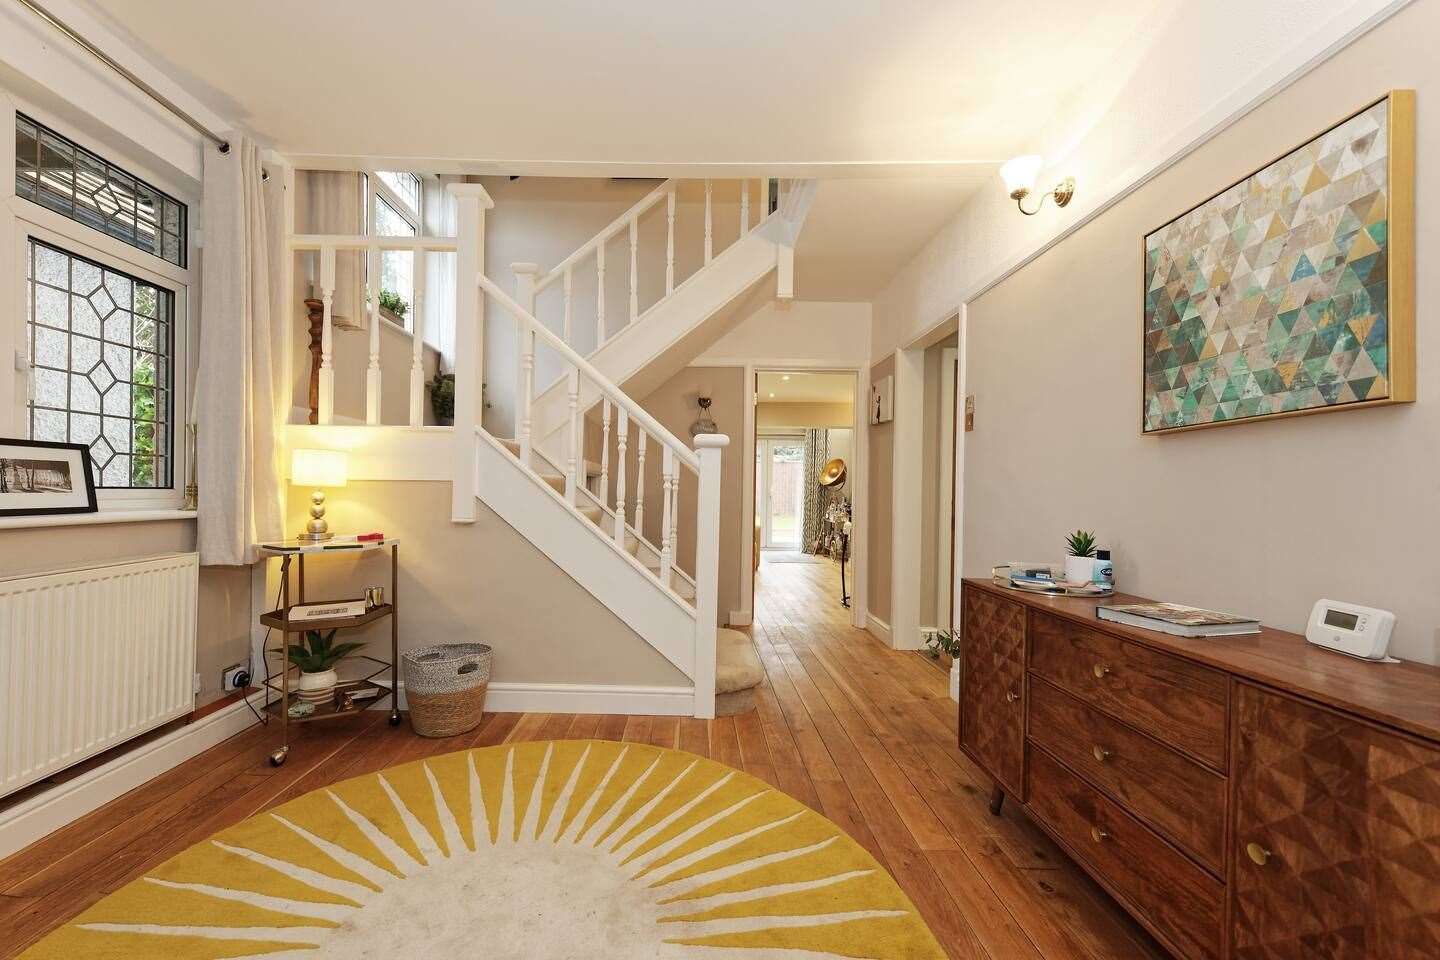 Probably best not to slide down those bannisters. Think of your deposit. Picture: Airbnb